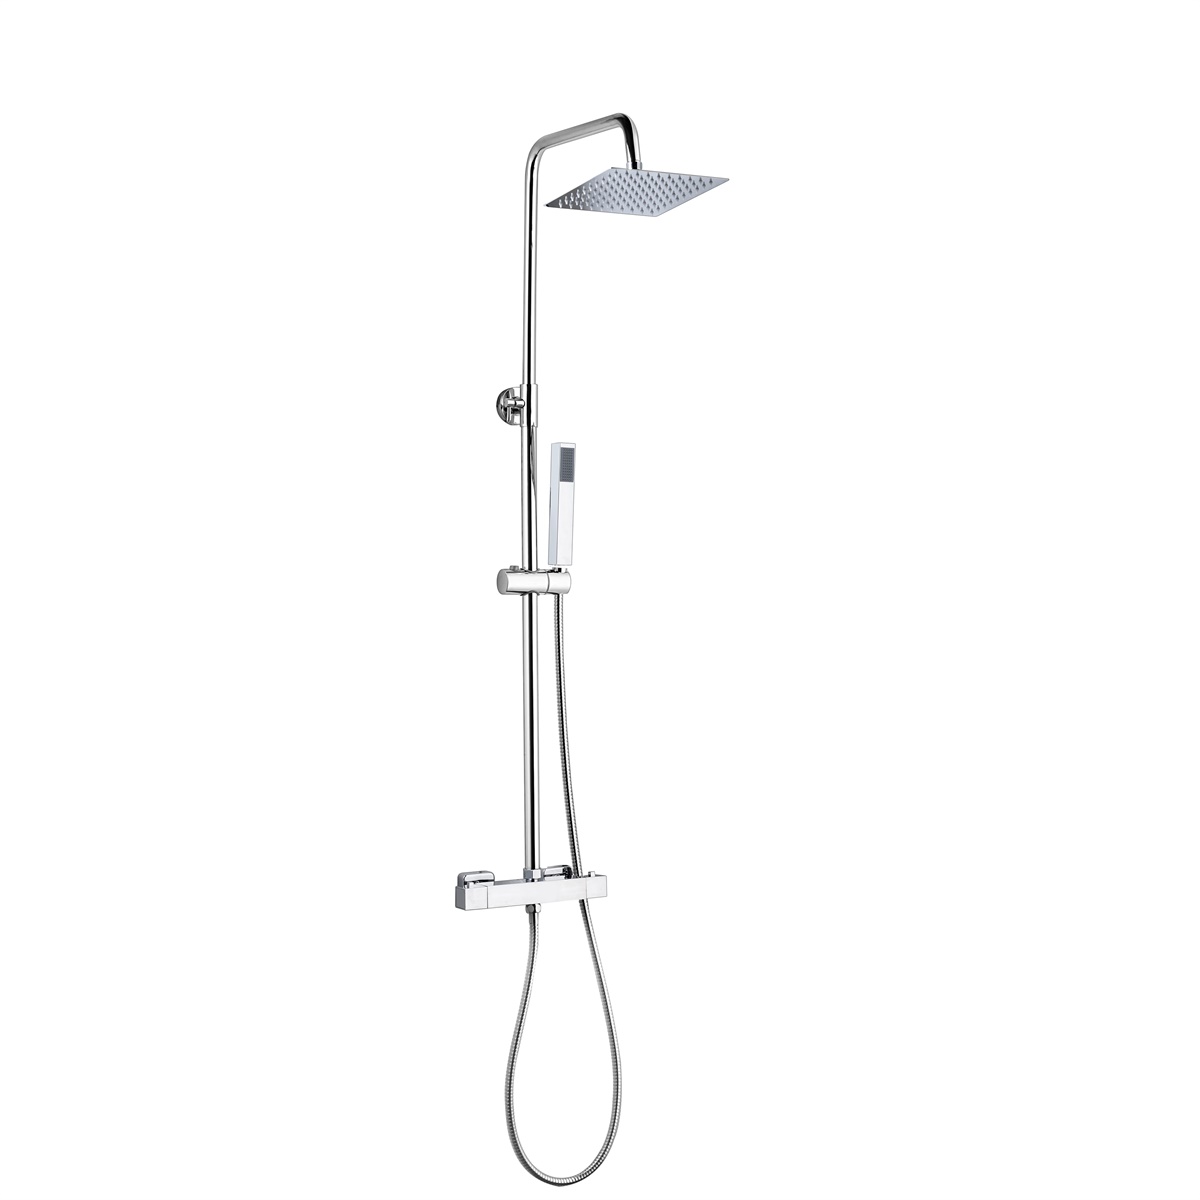 YS34134C	Shower column, rain shower column with thermostatic faucet, height adjustable;